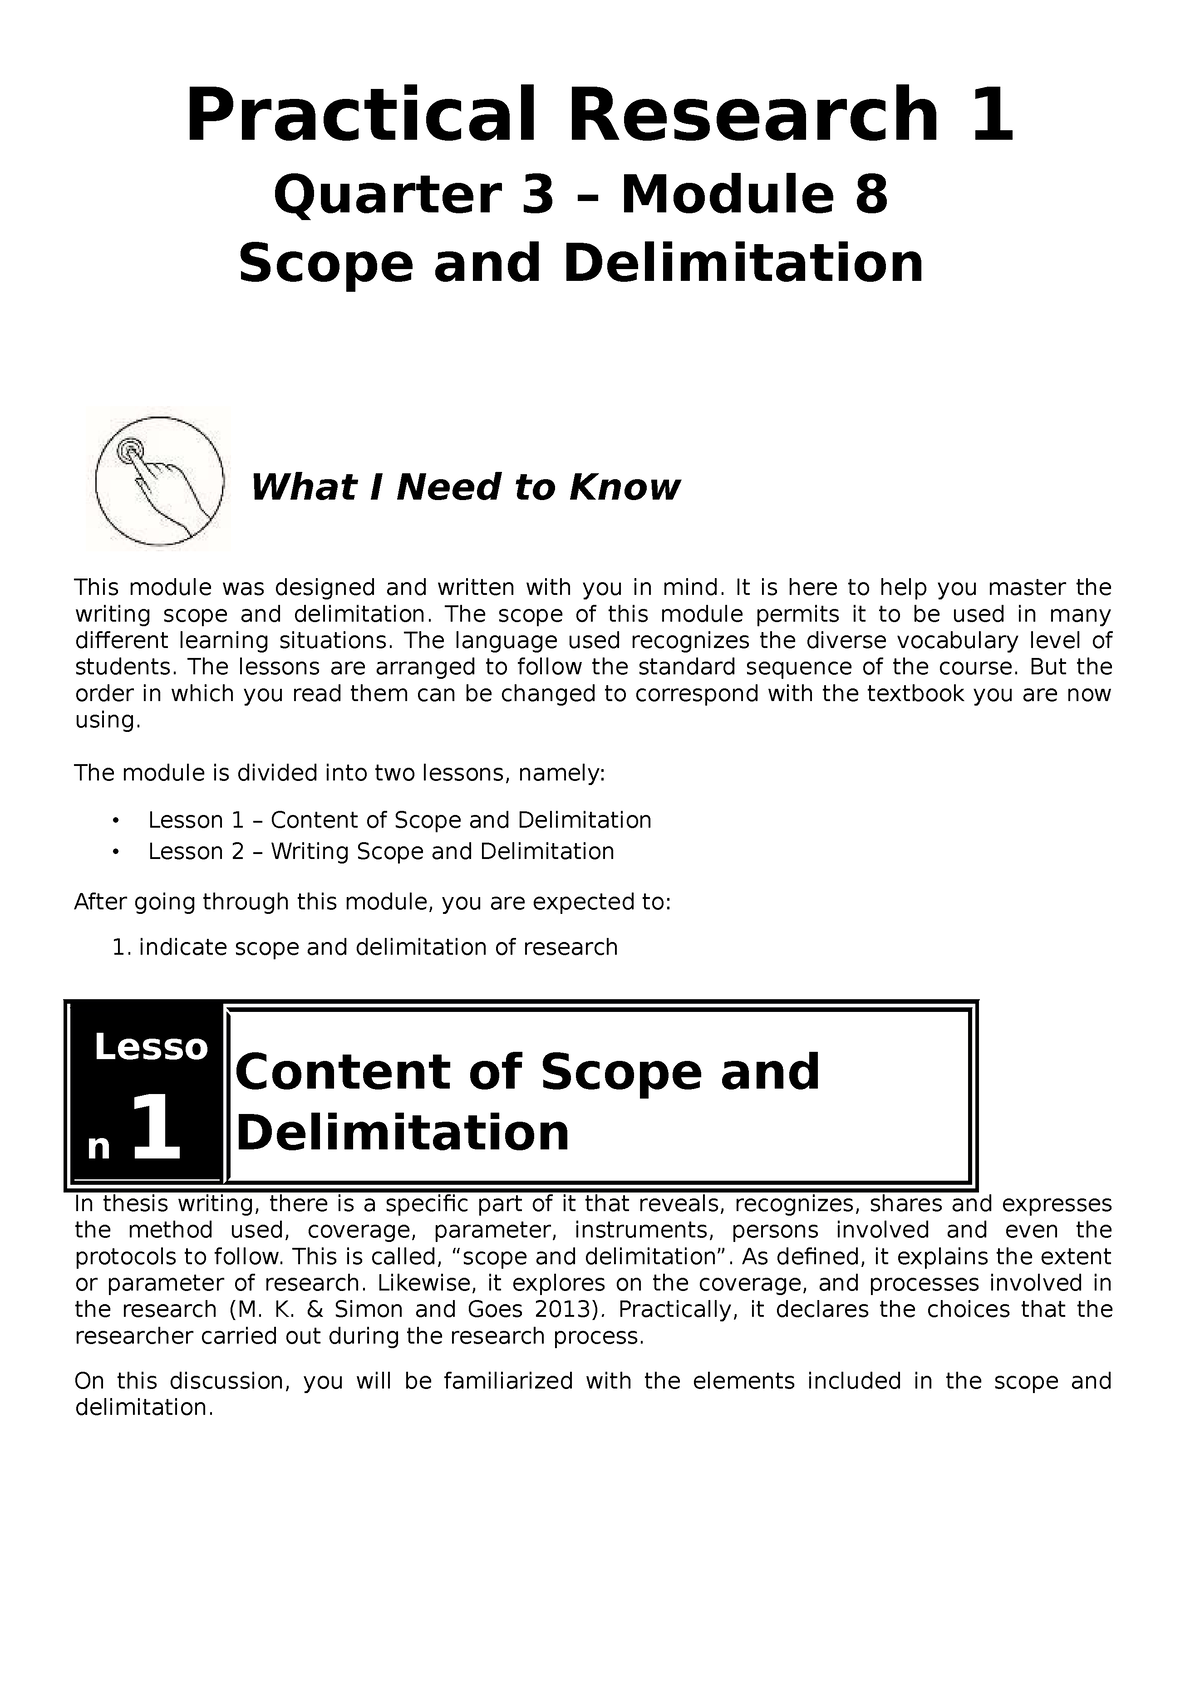 practical research 1 scope and delimitation module